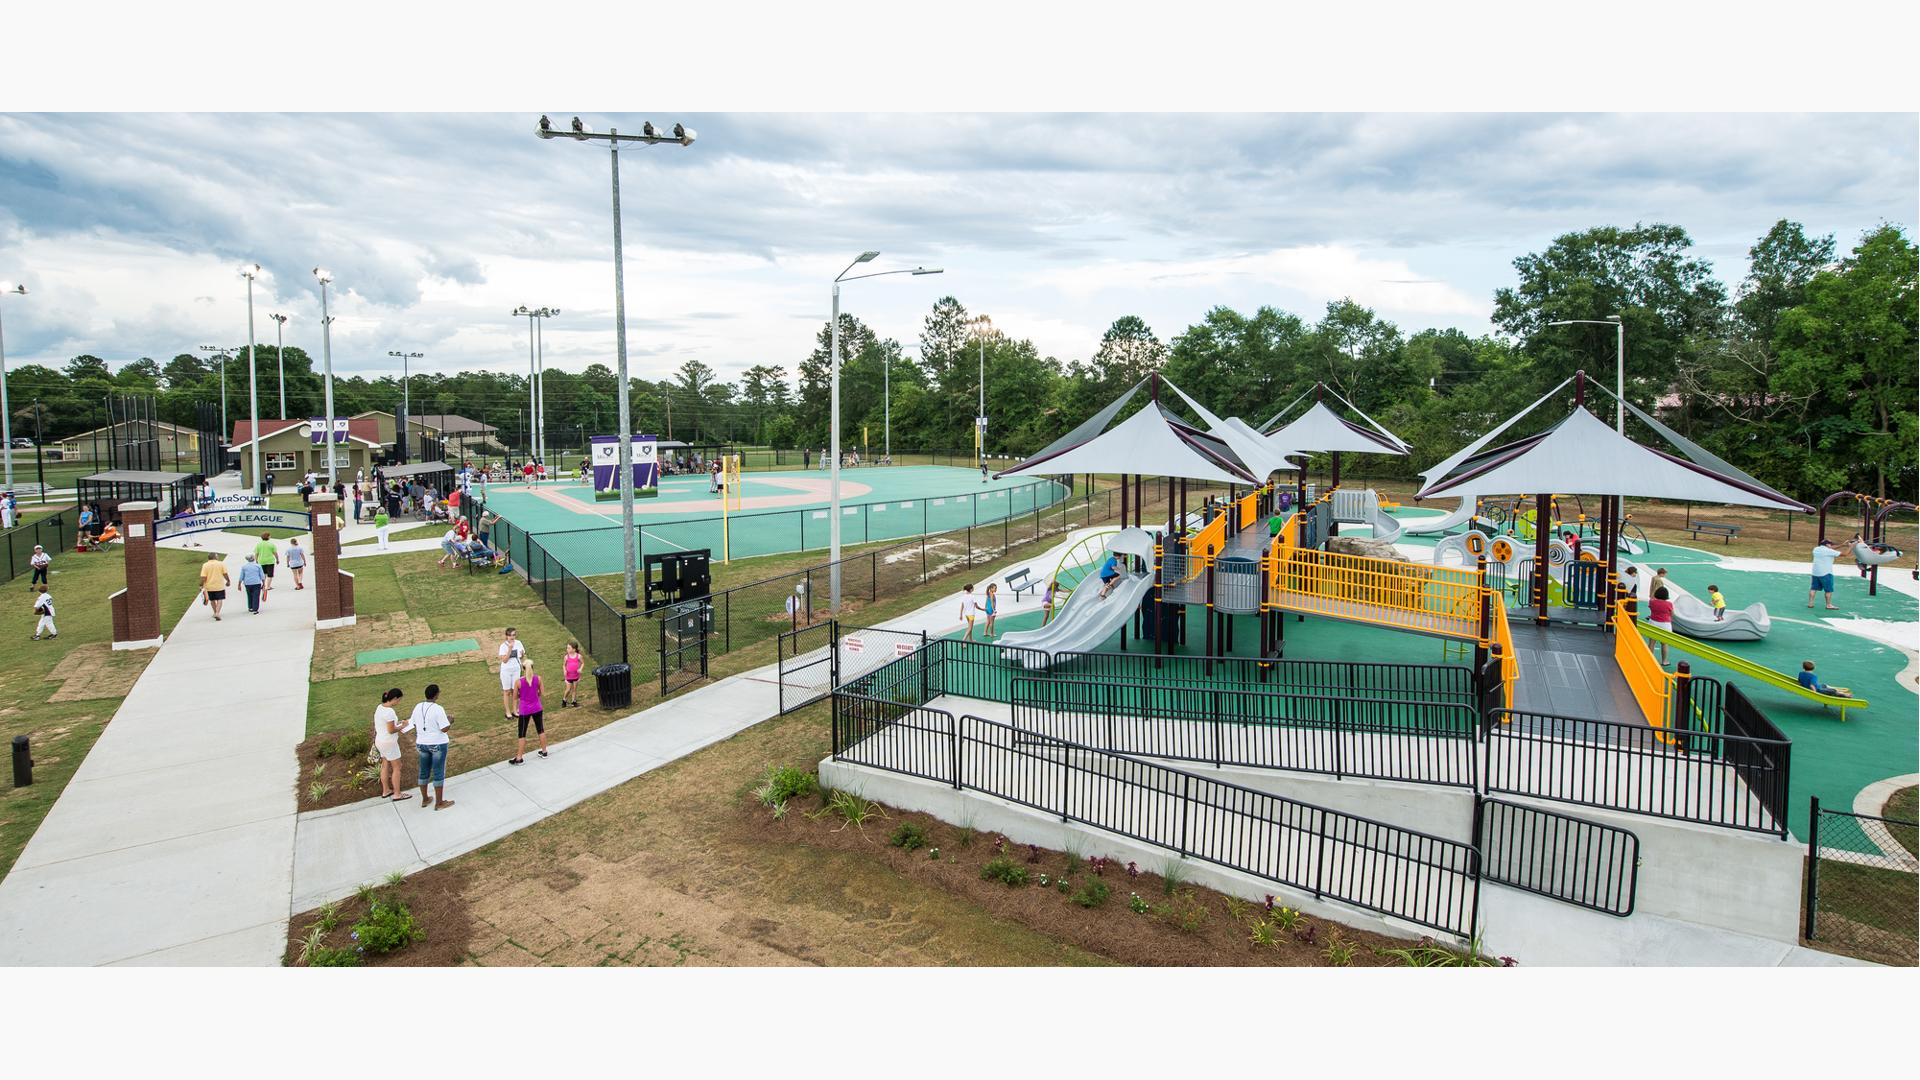 Miracle League of Andalusia, Andalusia, AL.  The Miracle League complex in Andalusia, Alabama, also includes an inclusive playground a PlayBooster® play structure, Rollerslide and activity panels. A Weevos® playsystem as well as as a Cozy Dome®, Sensory Play Center® and Sway Fun® Glider.